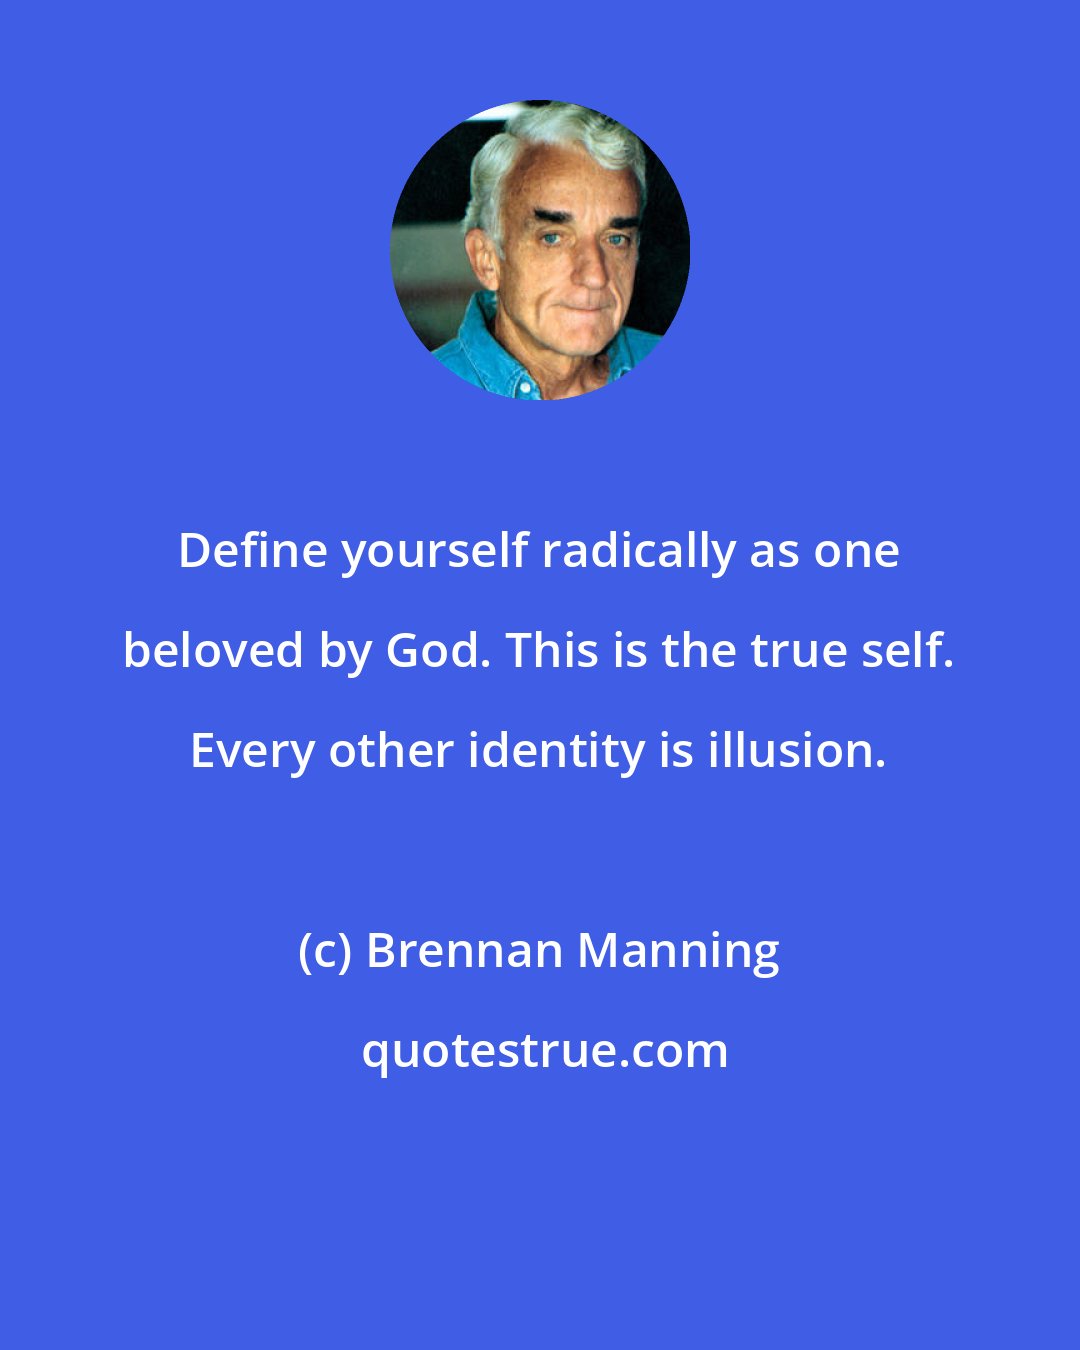 Brennan Manning: Define yourself radically as one beloved by God. This is the true self. Every other identity is illusion.